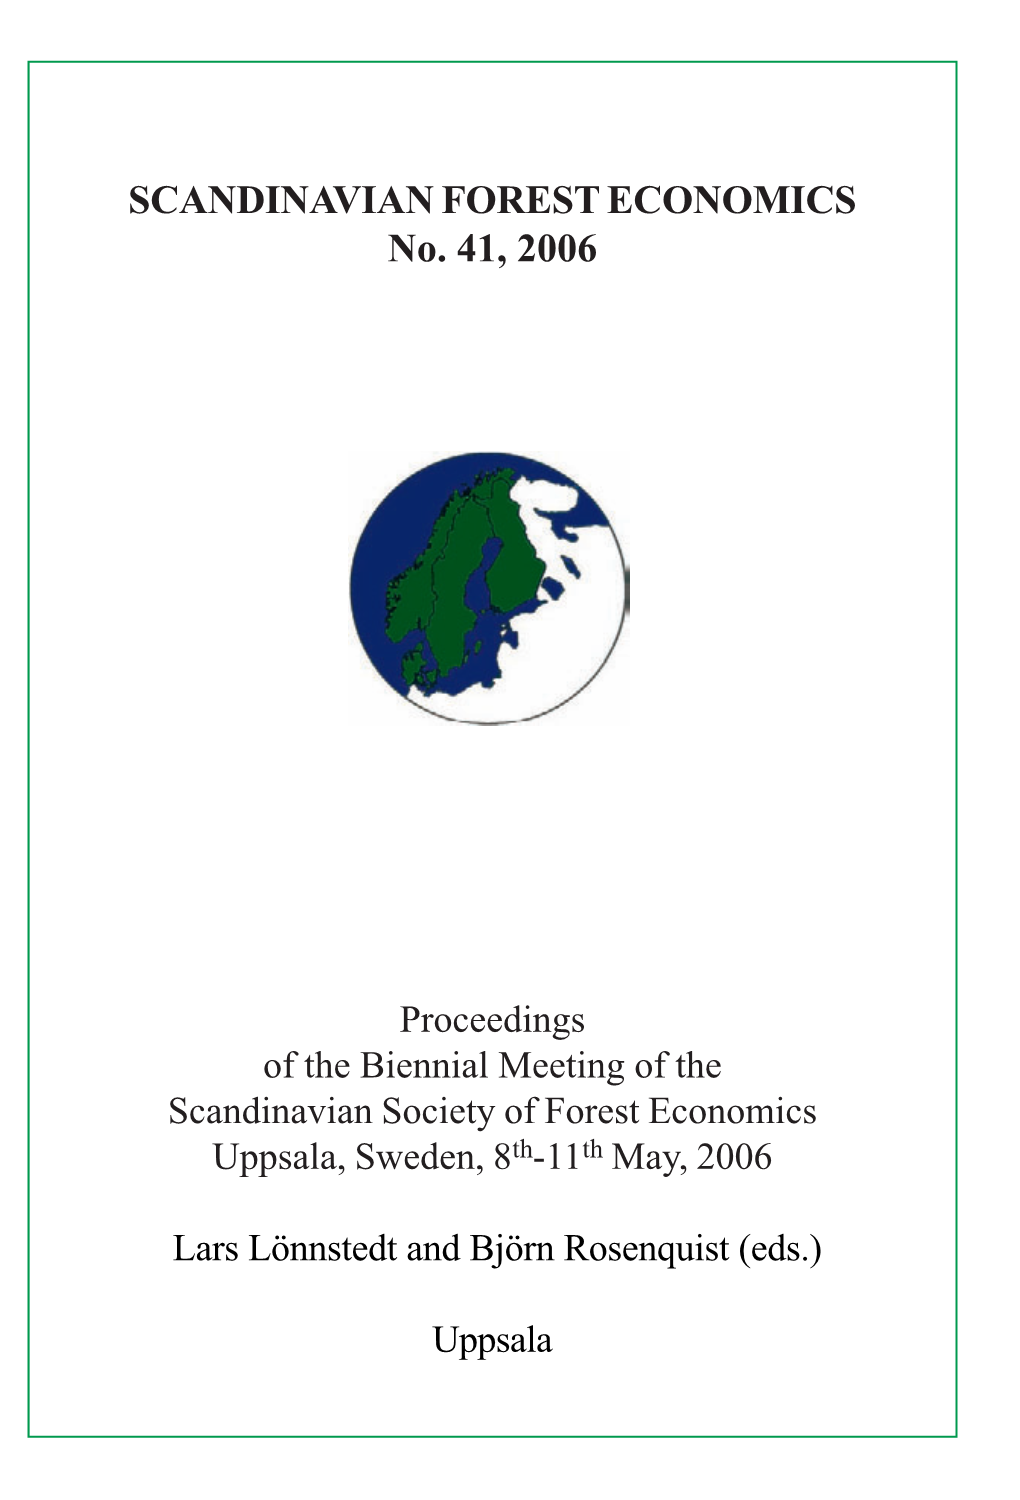 Proceedings of the Biennial Meeting of the Scandinavian Society of Forest Economics Uppsala, Sweden, 8Th-11Th May, 2006